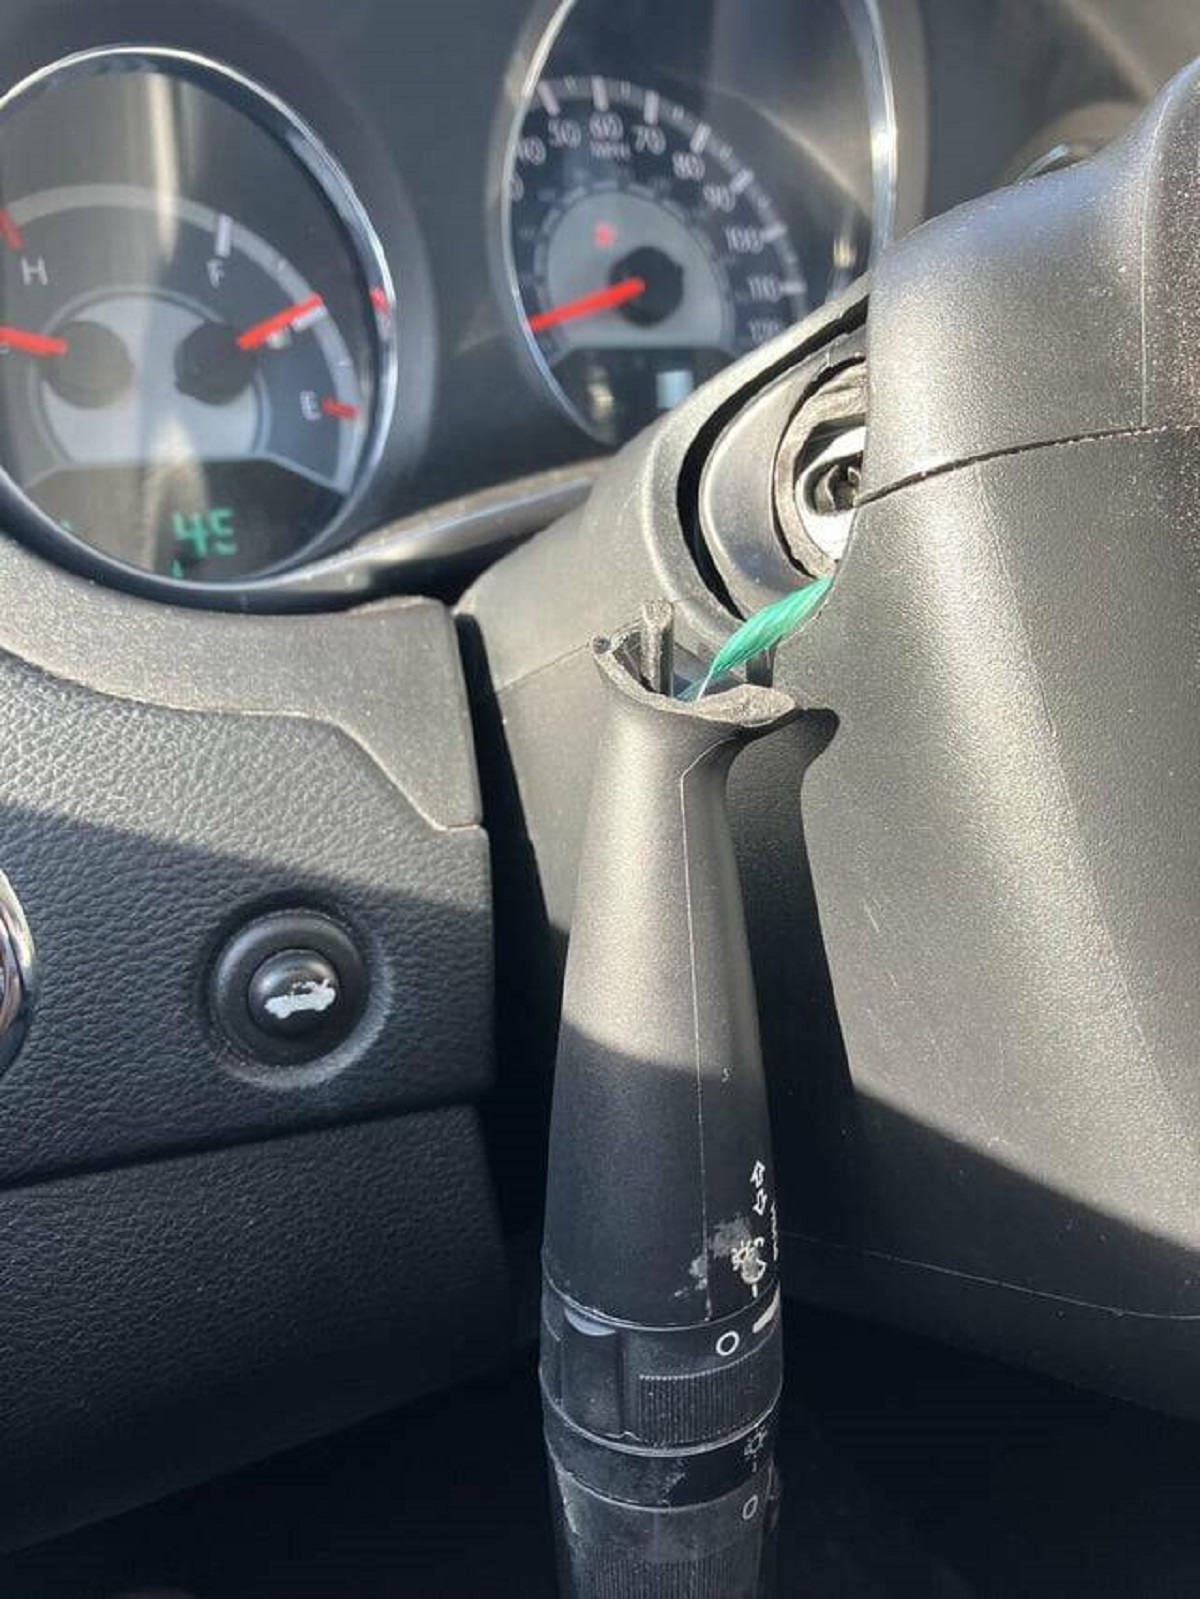 "Paid almost 1k to fix my car last week and today my blinker broke."